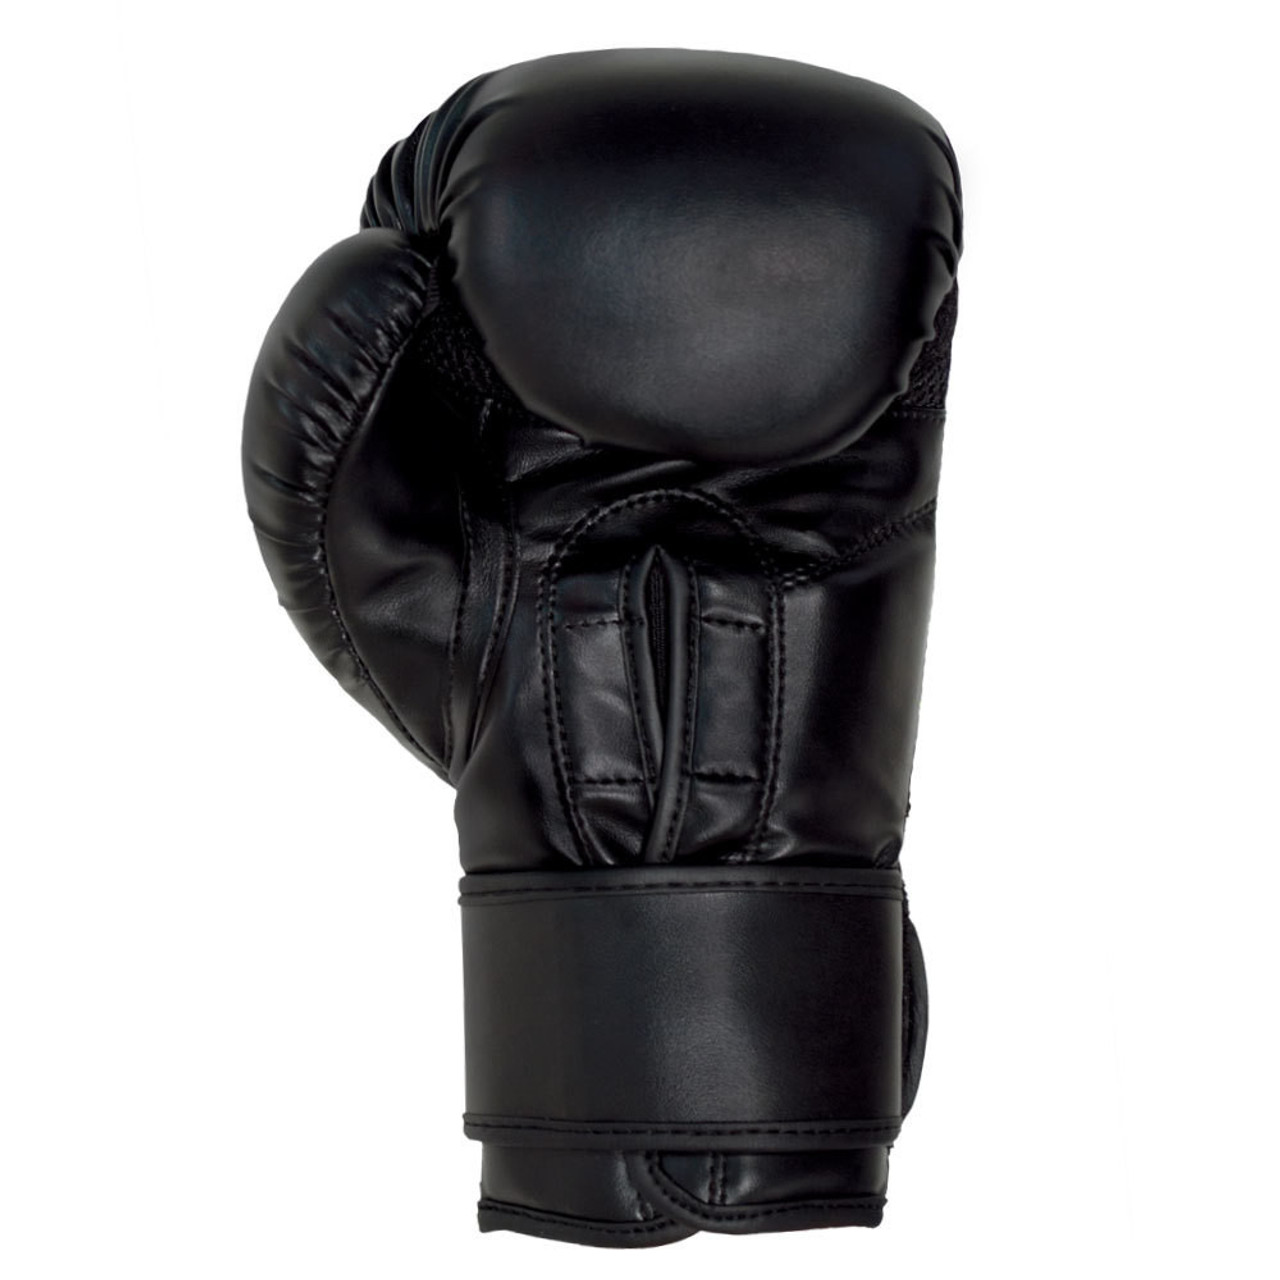 Youth Deluxe Boxing Gloves, 8 oz Boxing Gloves, Kids Boxing Equipment